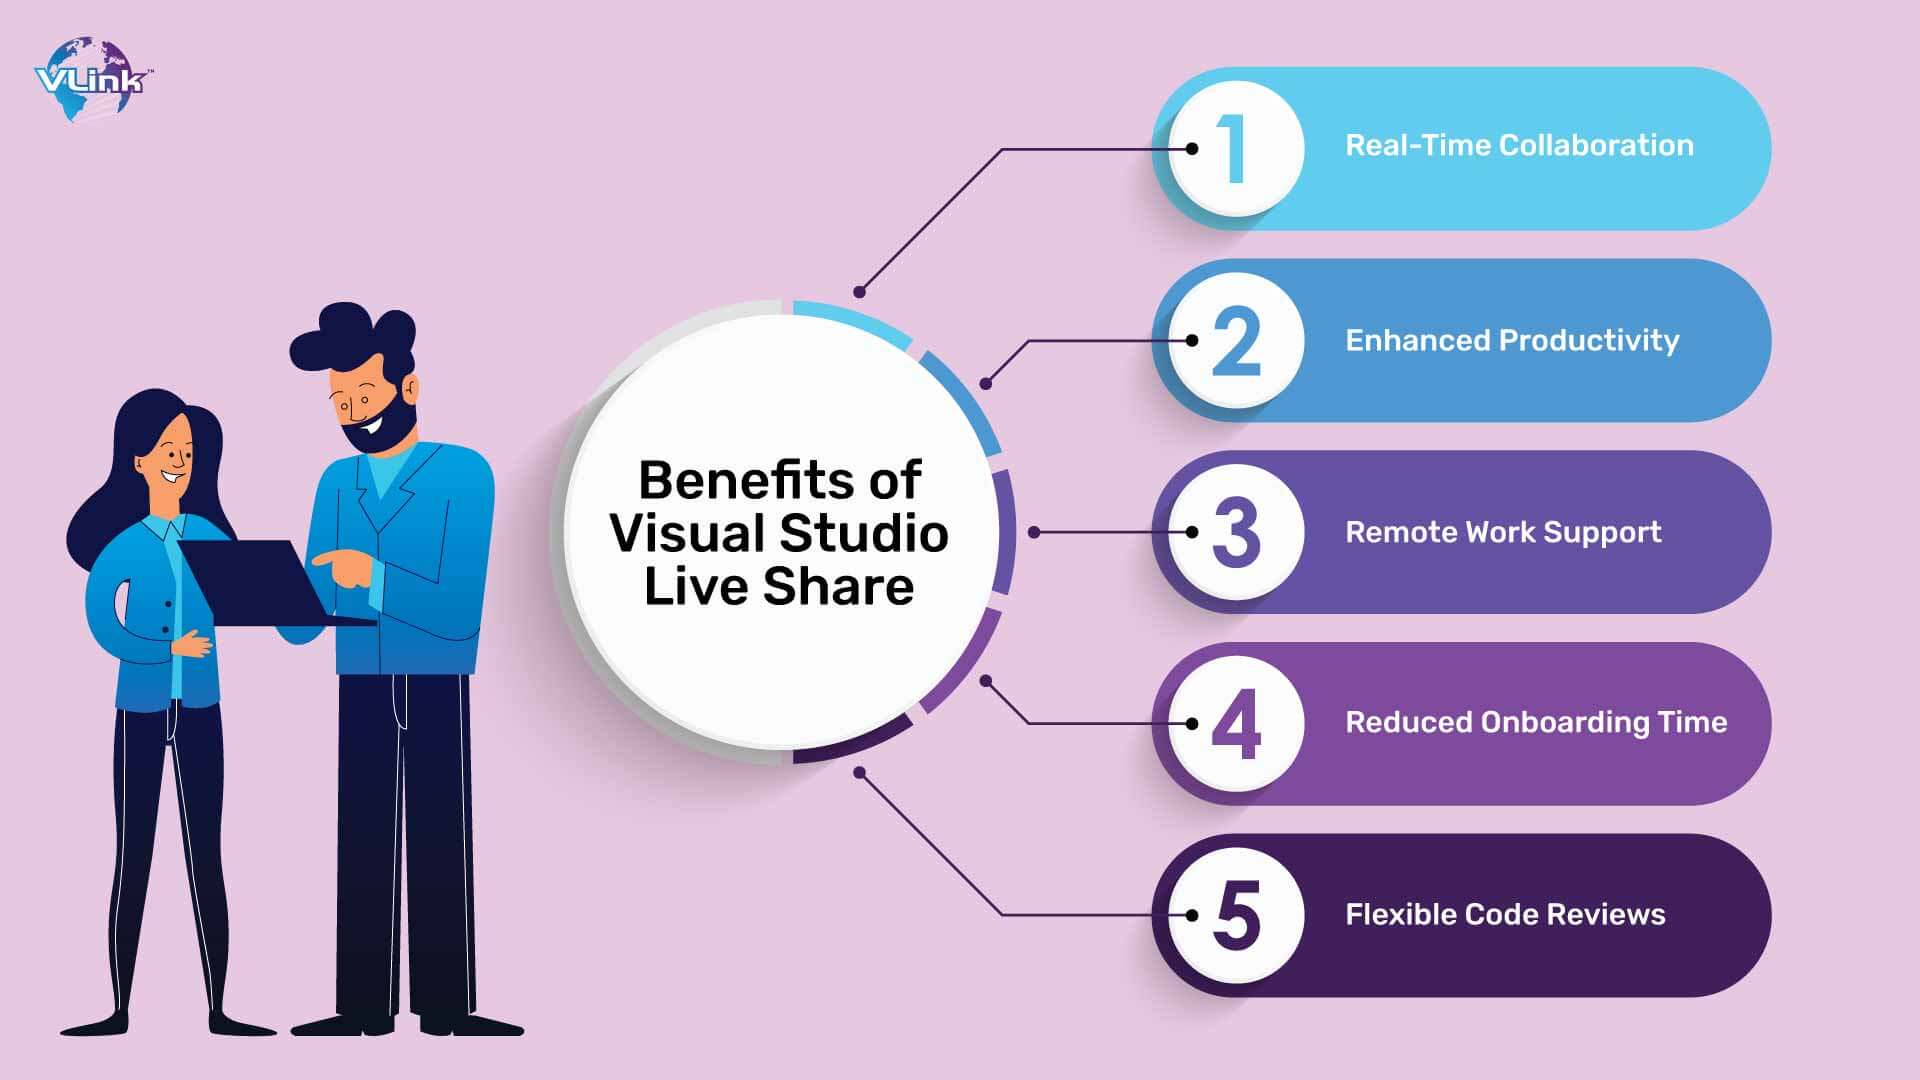 What are the Benefits of Visual Studio Live Share